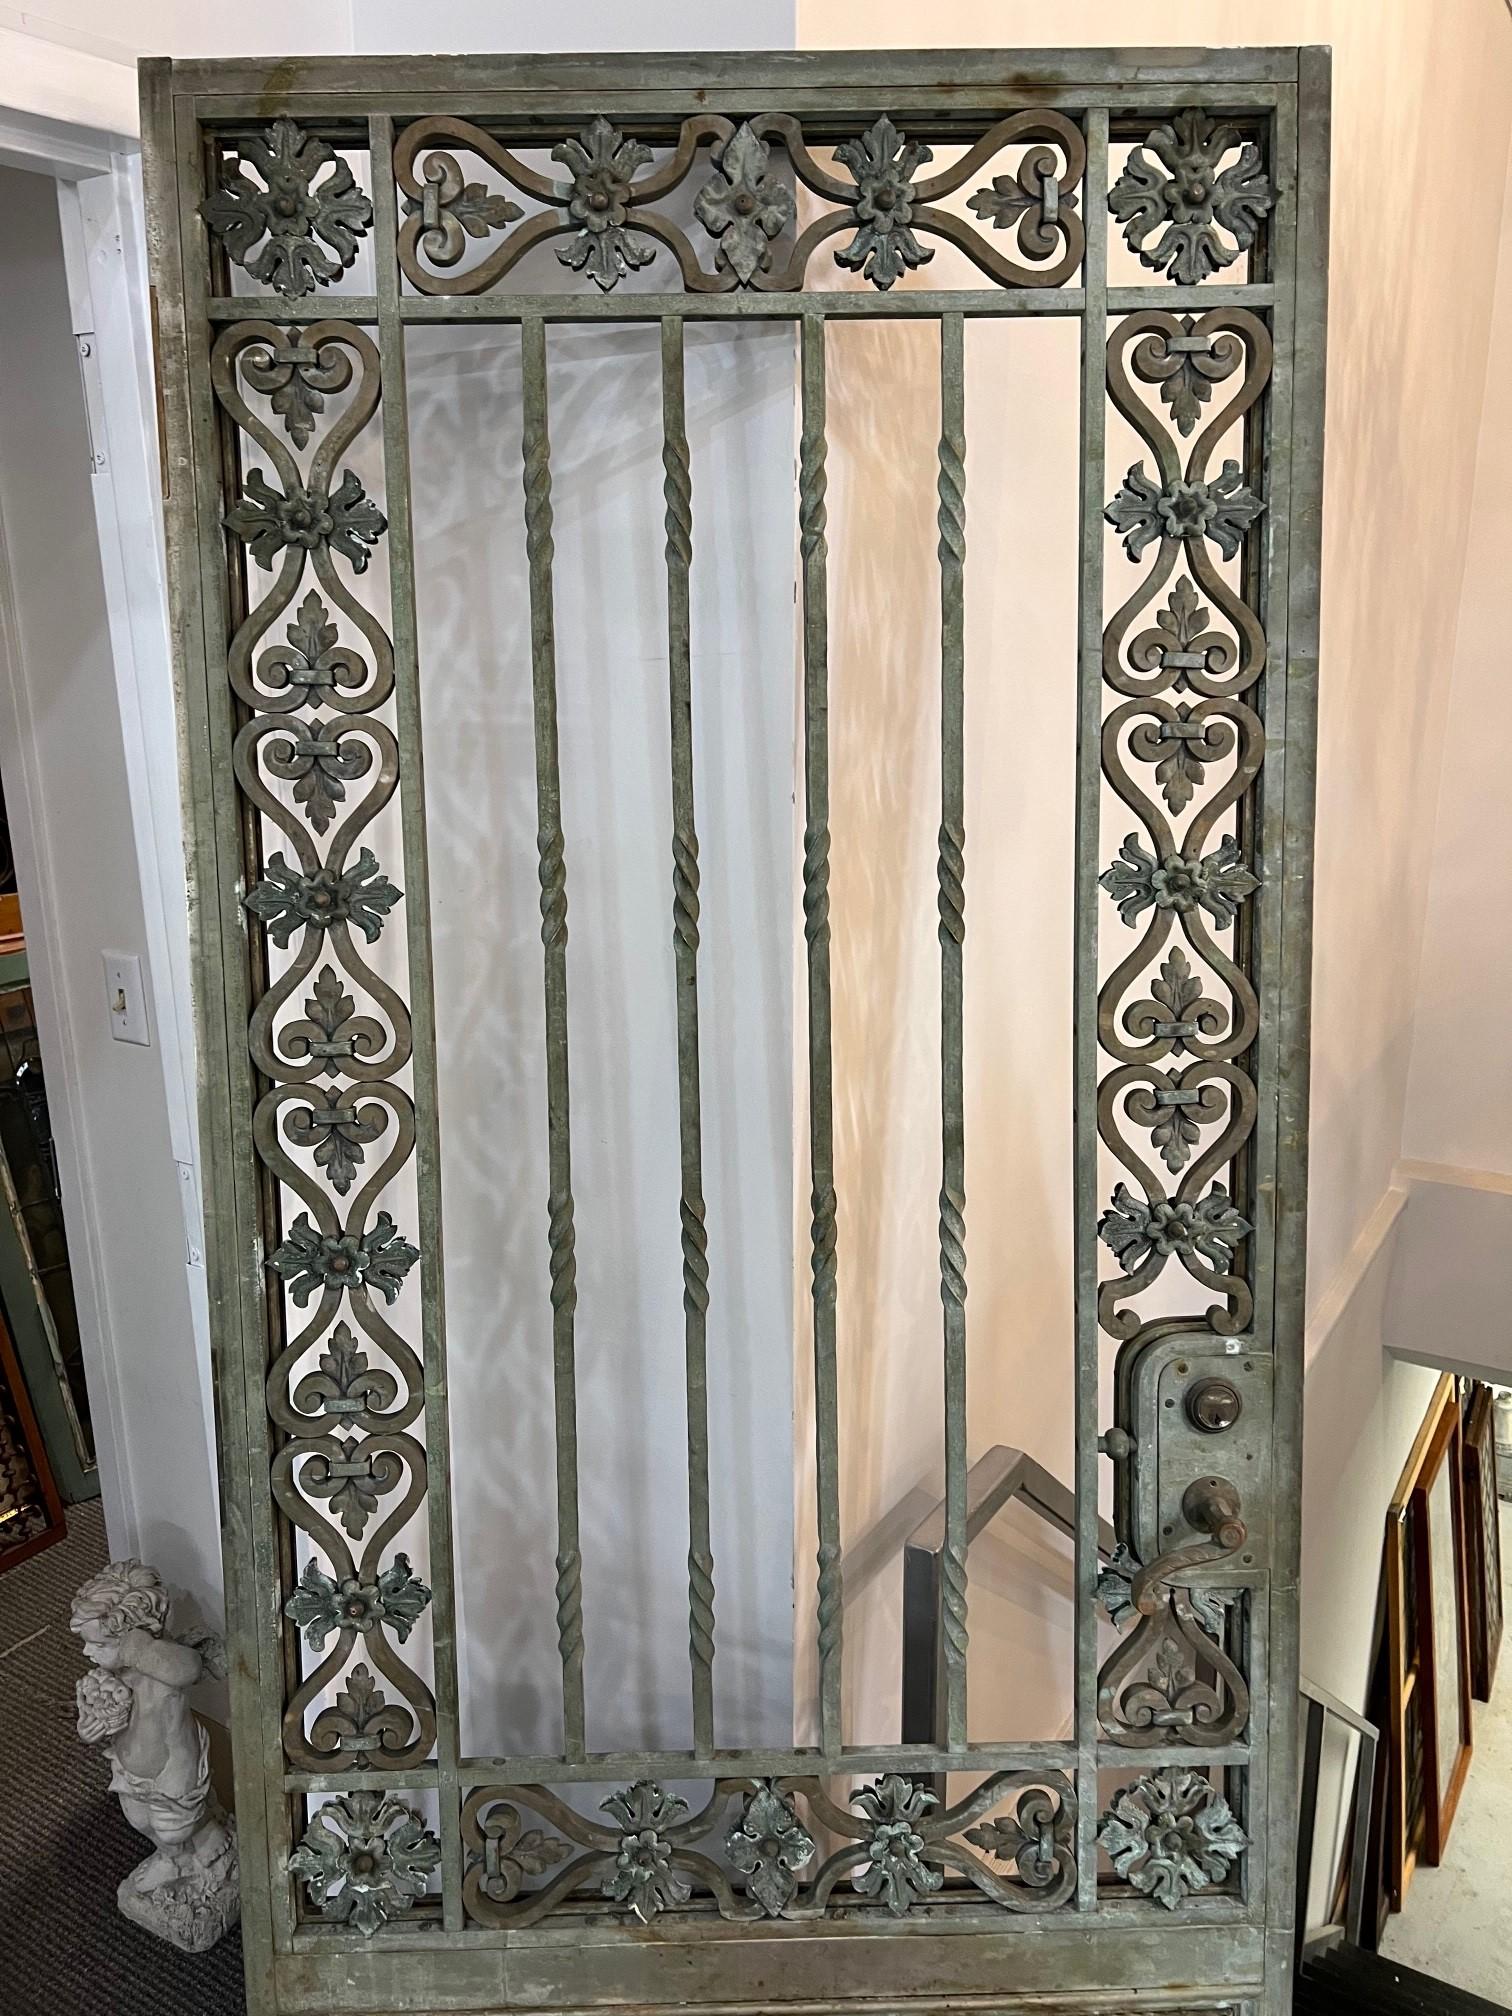 Early 20th century bronze door or exterior gate with beautiful detailing on both sides. The glass is missing from the panel shown in the photo but could easily be replaced. With the glass panel this would make a fantastic wine cellar door. I do have